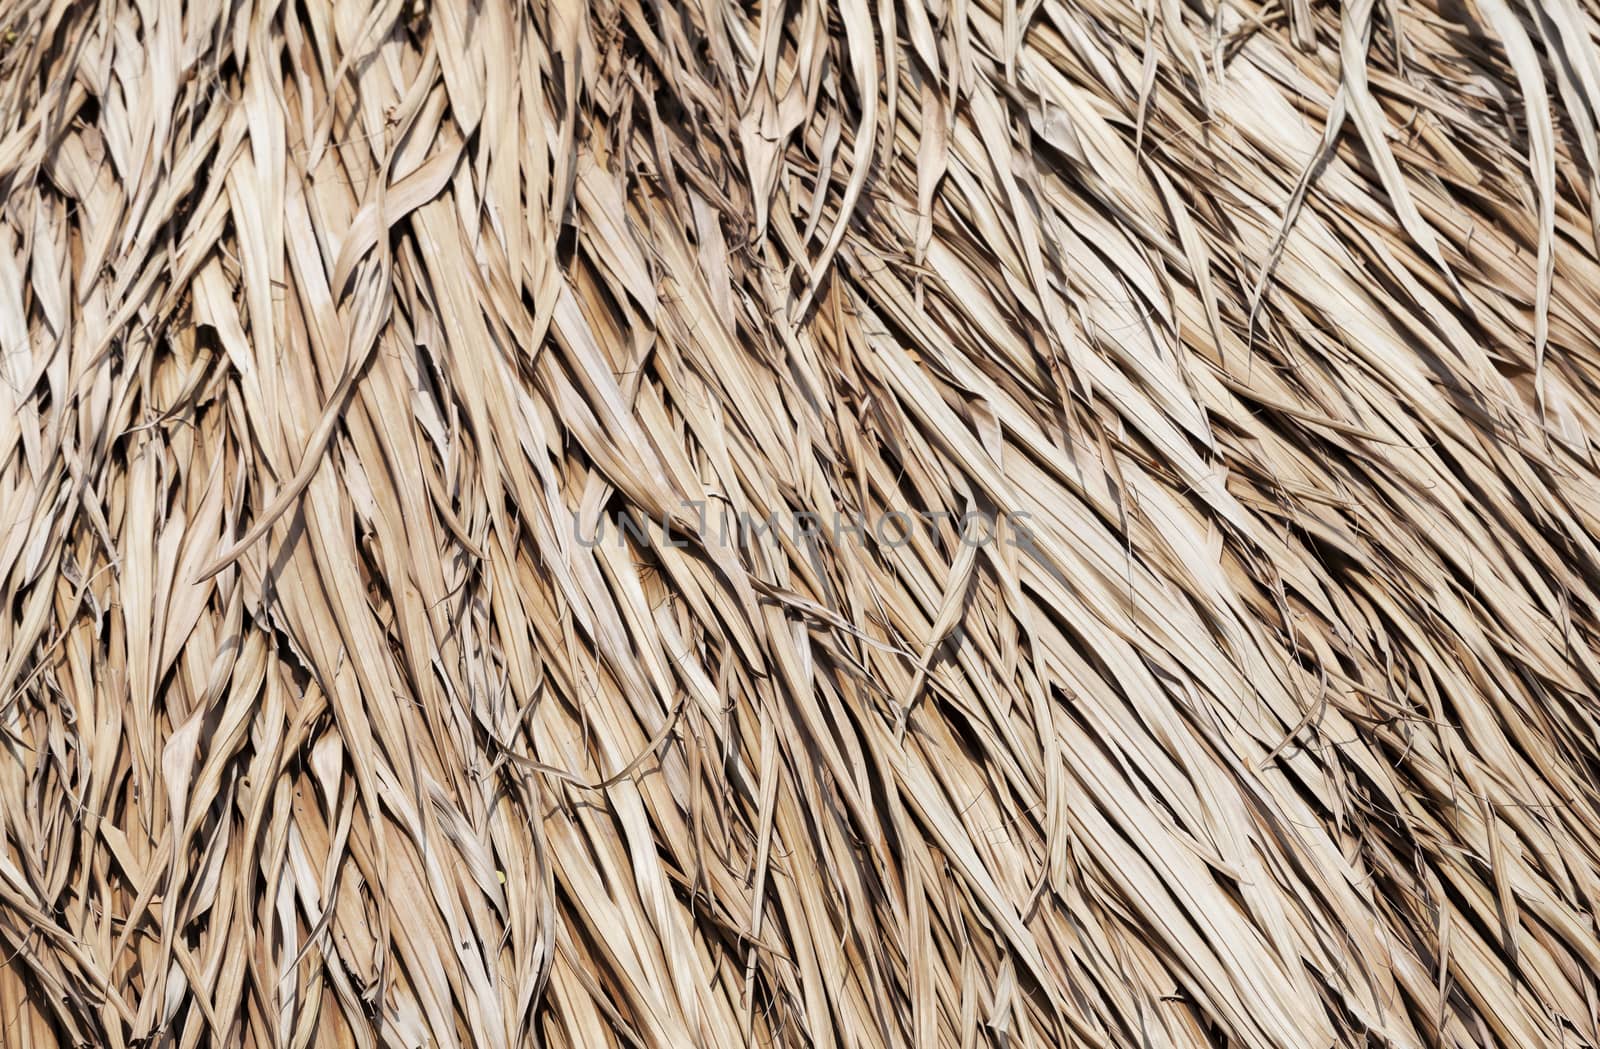 Close up of thatched roof for texture or background